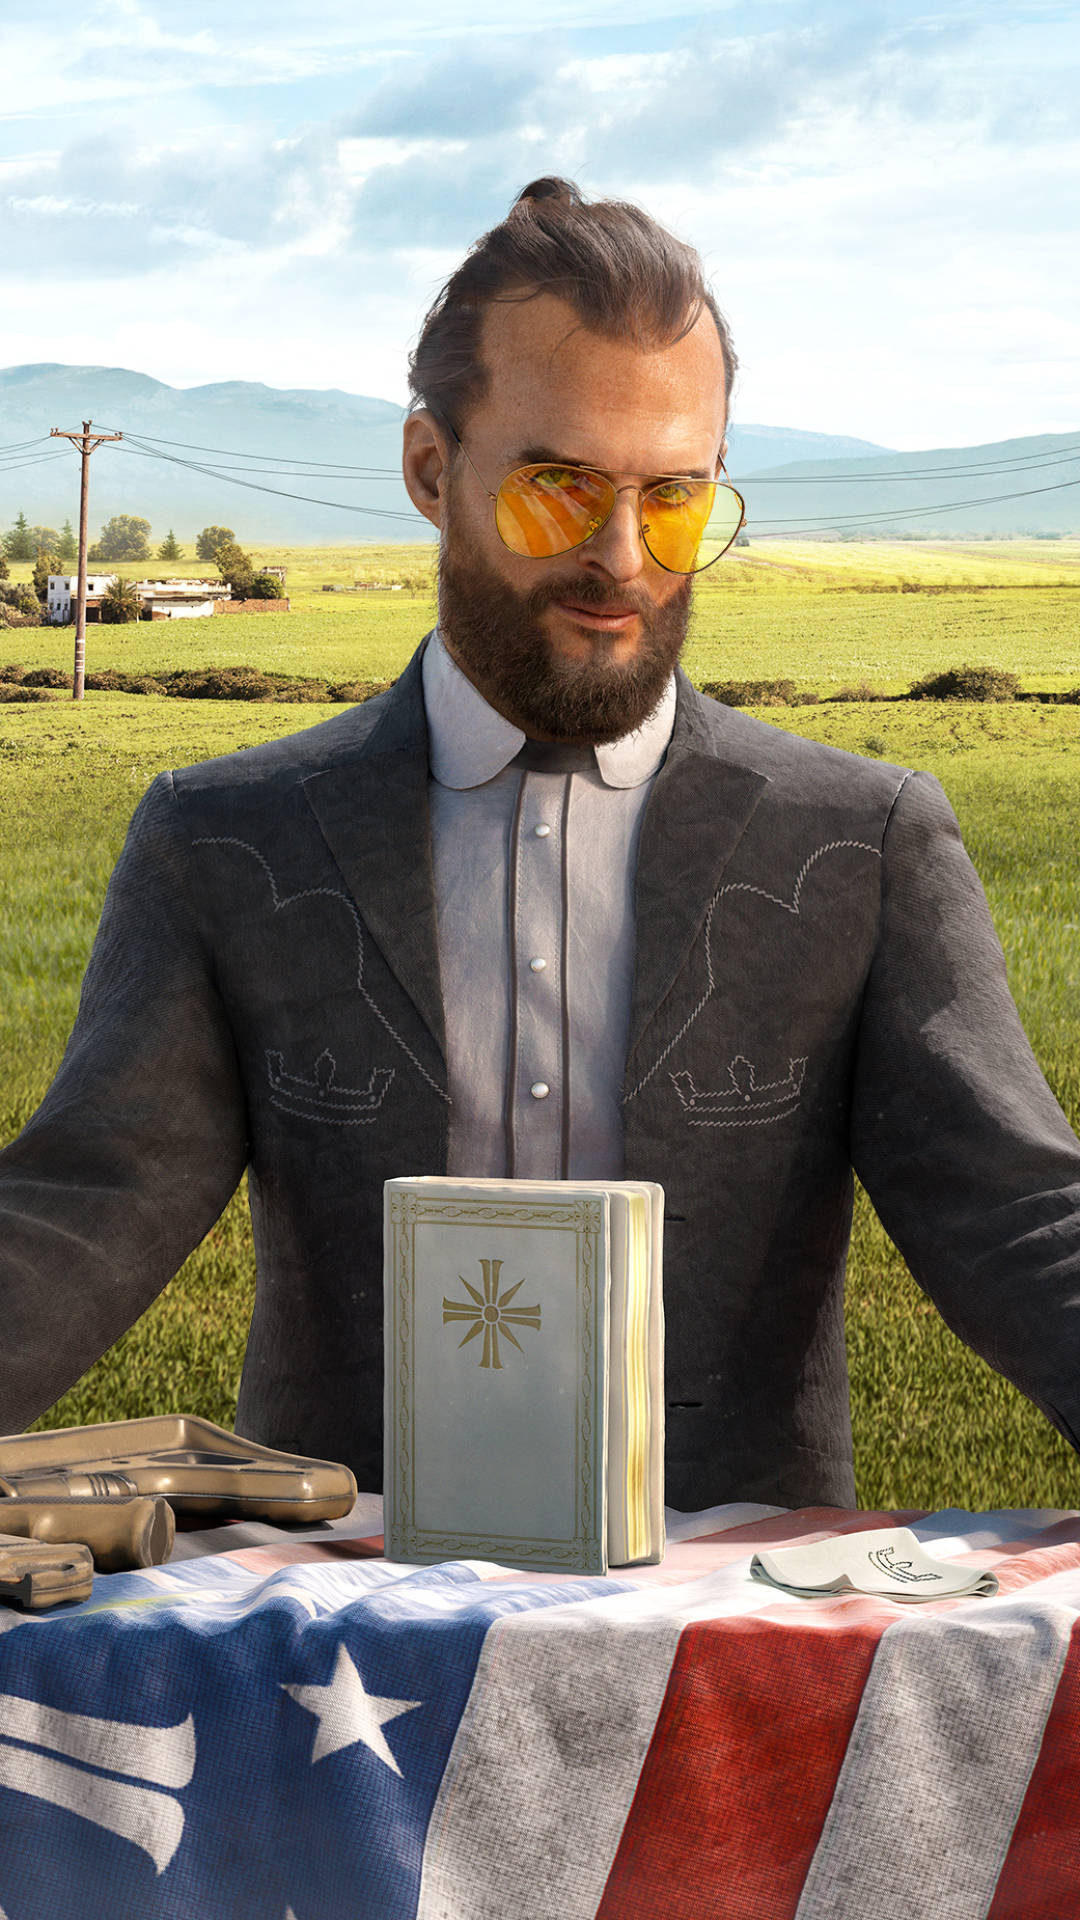 Download Far Cry 5 Joseph With Sunglasses Iphone Wallpaper | Wallpapers.Com